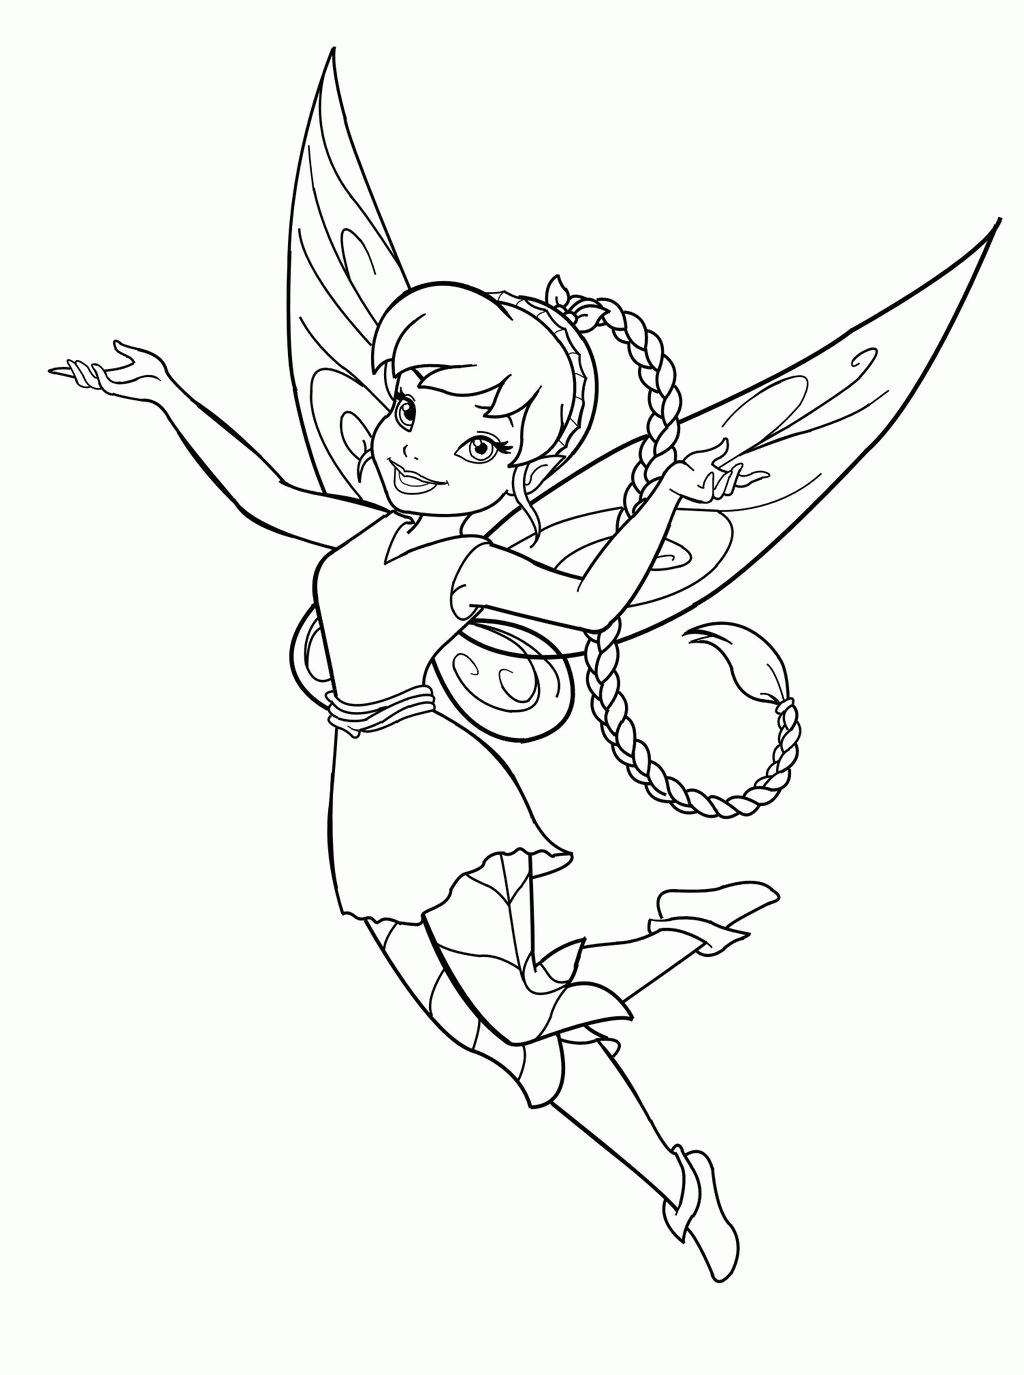 Amazing of Free Coloring Page Fairy About Fairy Coloring #984